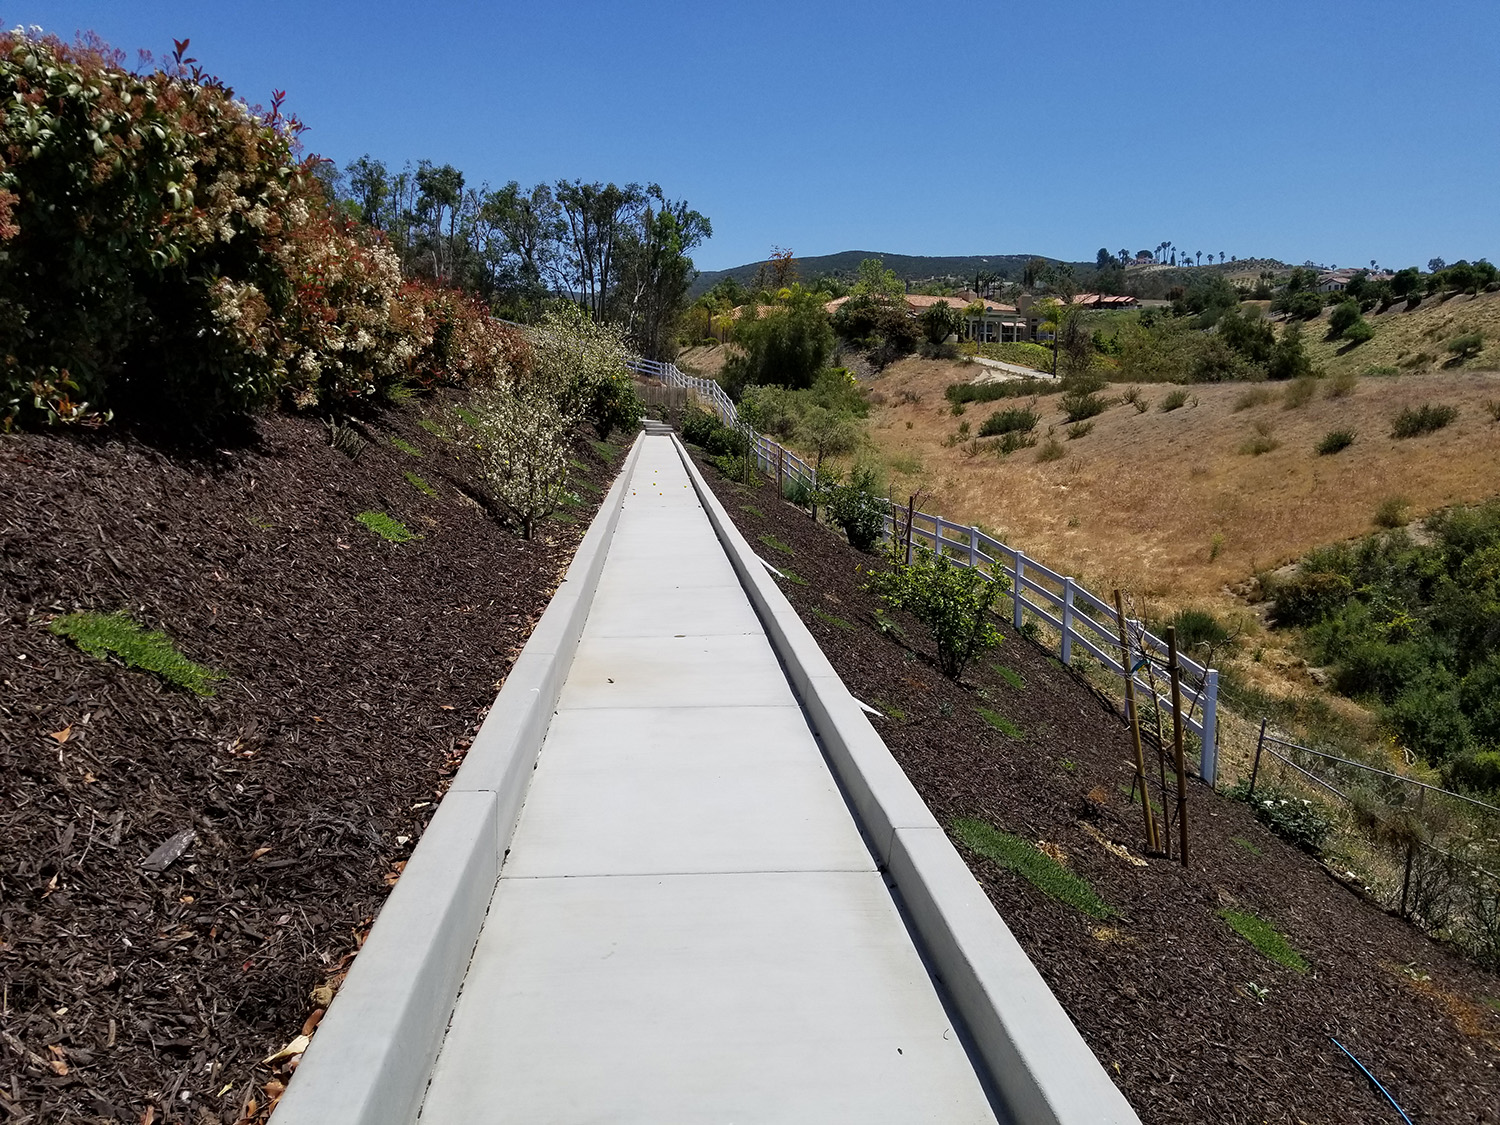 Concrete pathway with concrete retaining walls and curbs